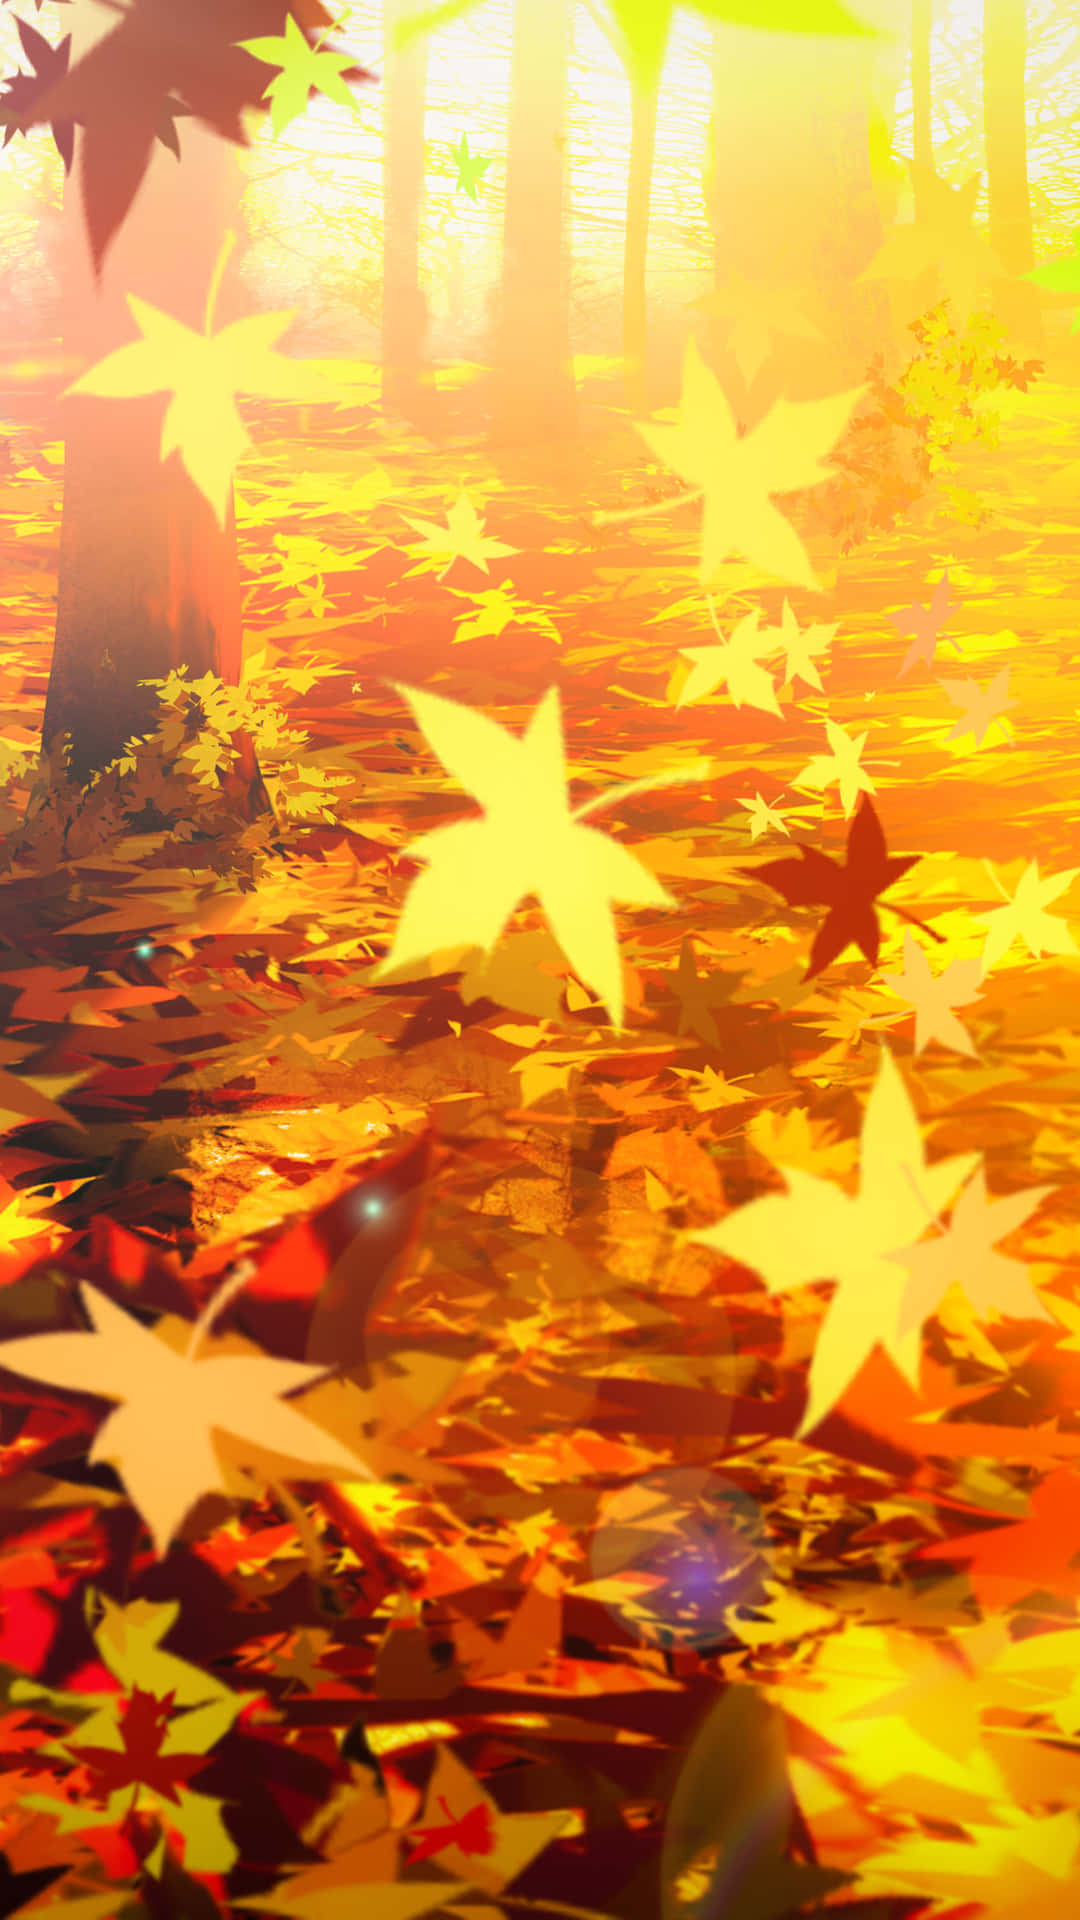 Experience the Magic of Autumn with the Autumn Leaves Phone Wallpaper